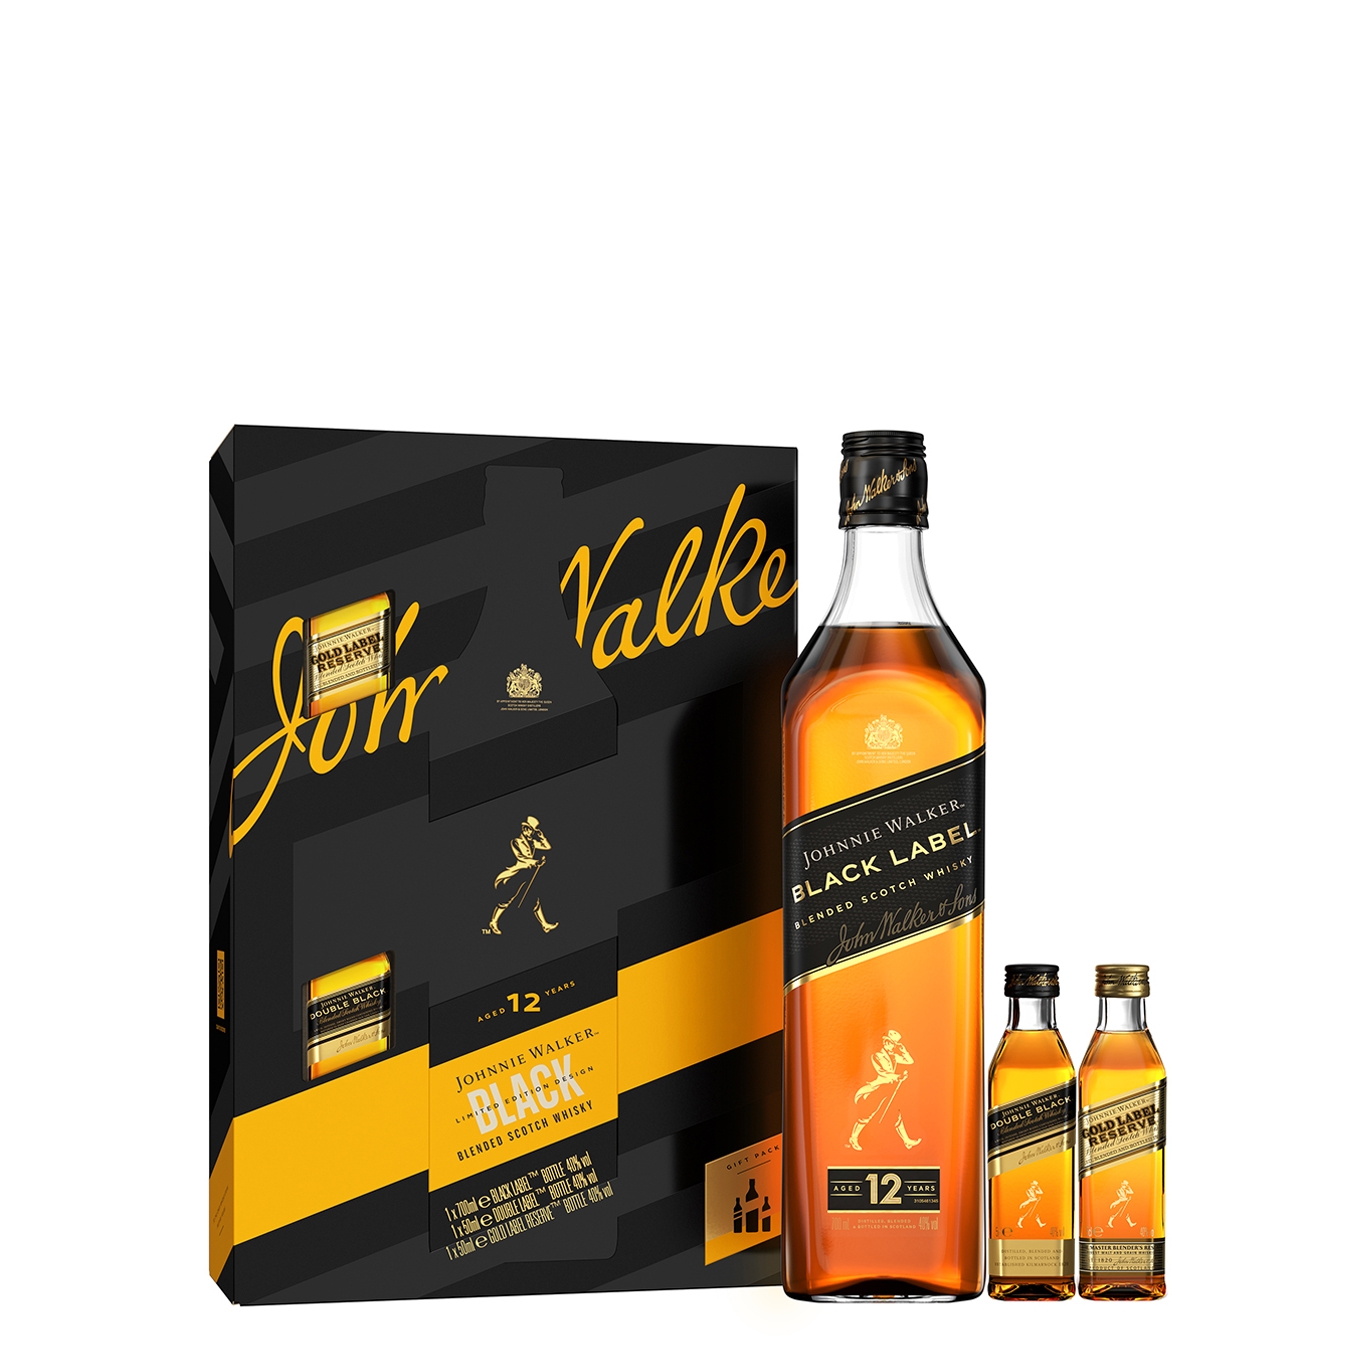 Johnnie Walker Whisky Black Label 12 Year Old Blended Scotch Whisky & Miniatures Gift Box